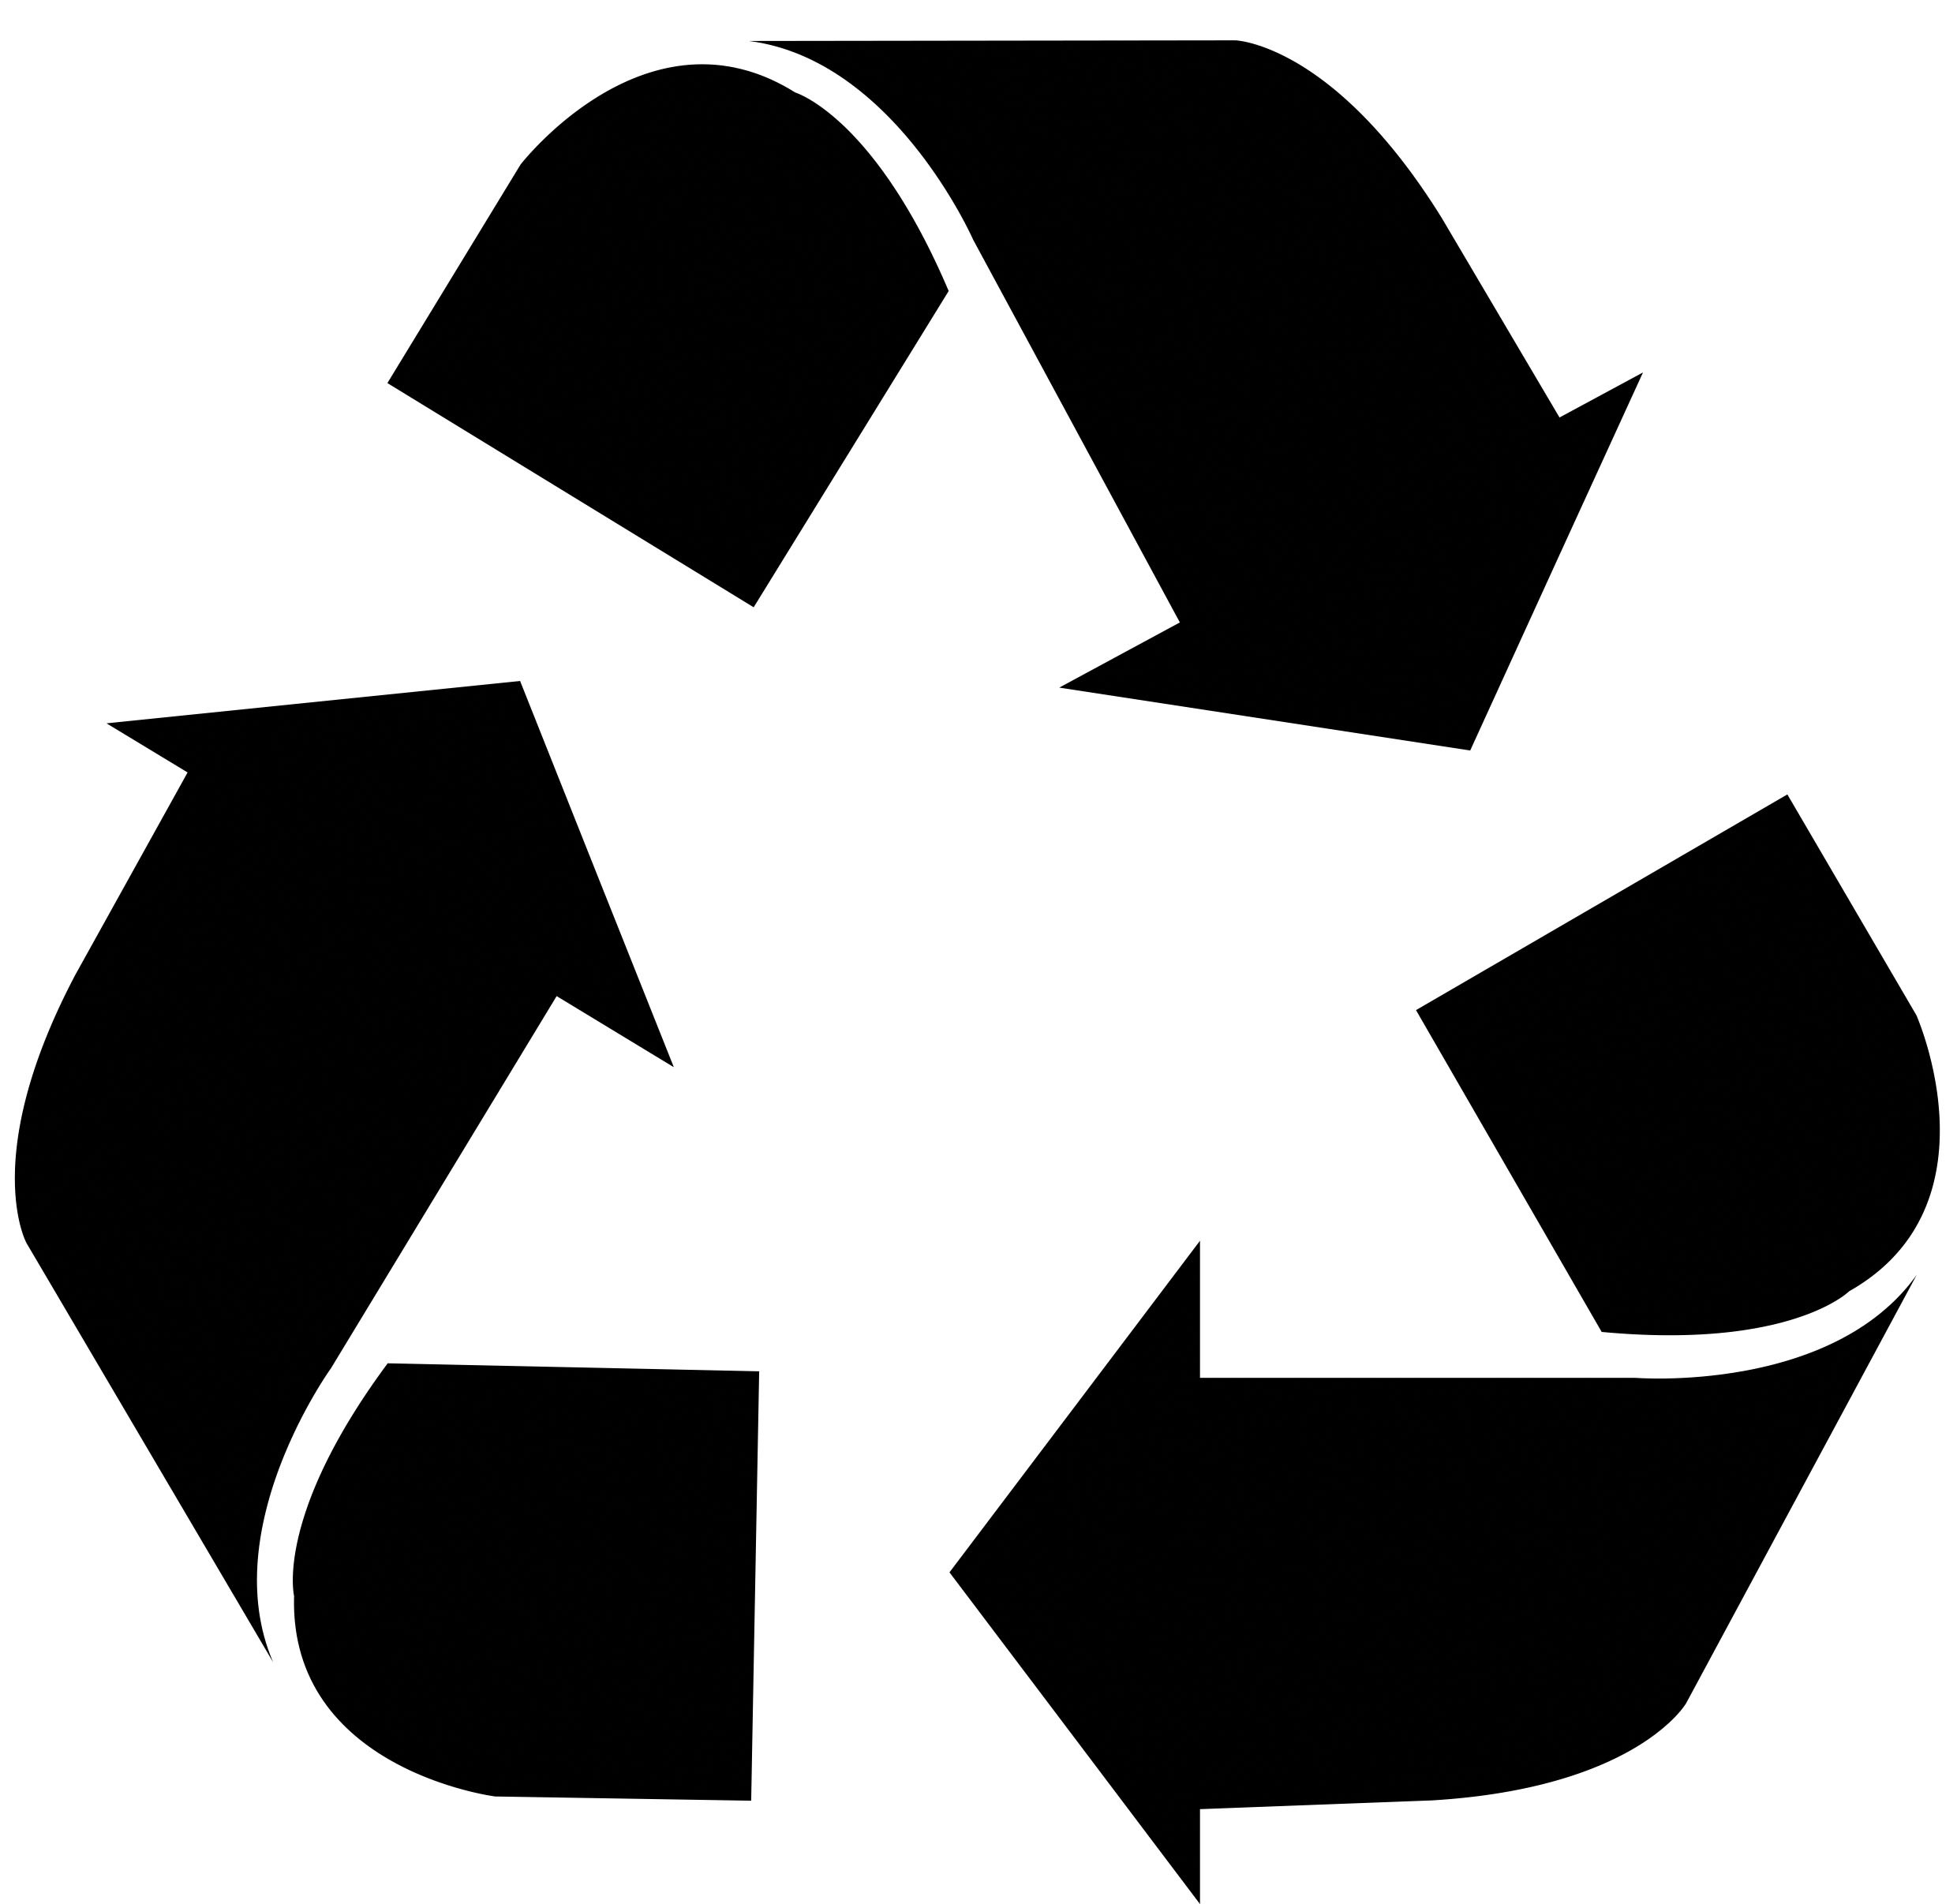 Free Recycle Sign, Download Free Clip Art, Free Clip Art on